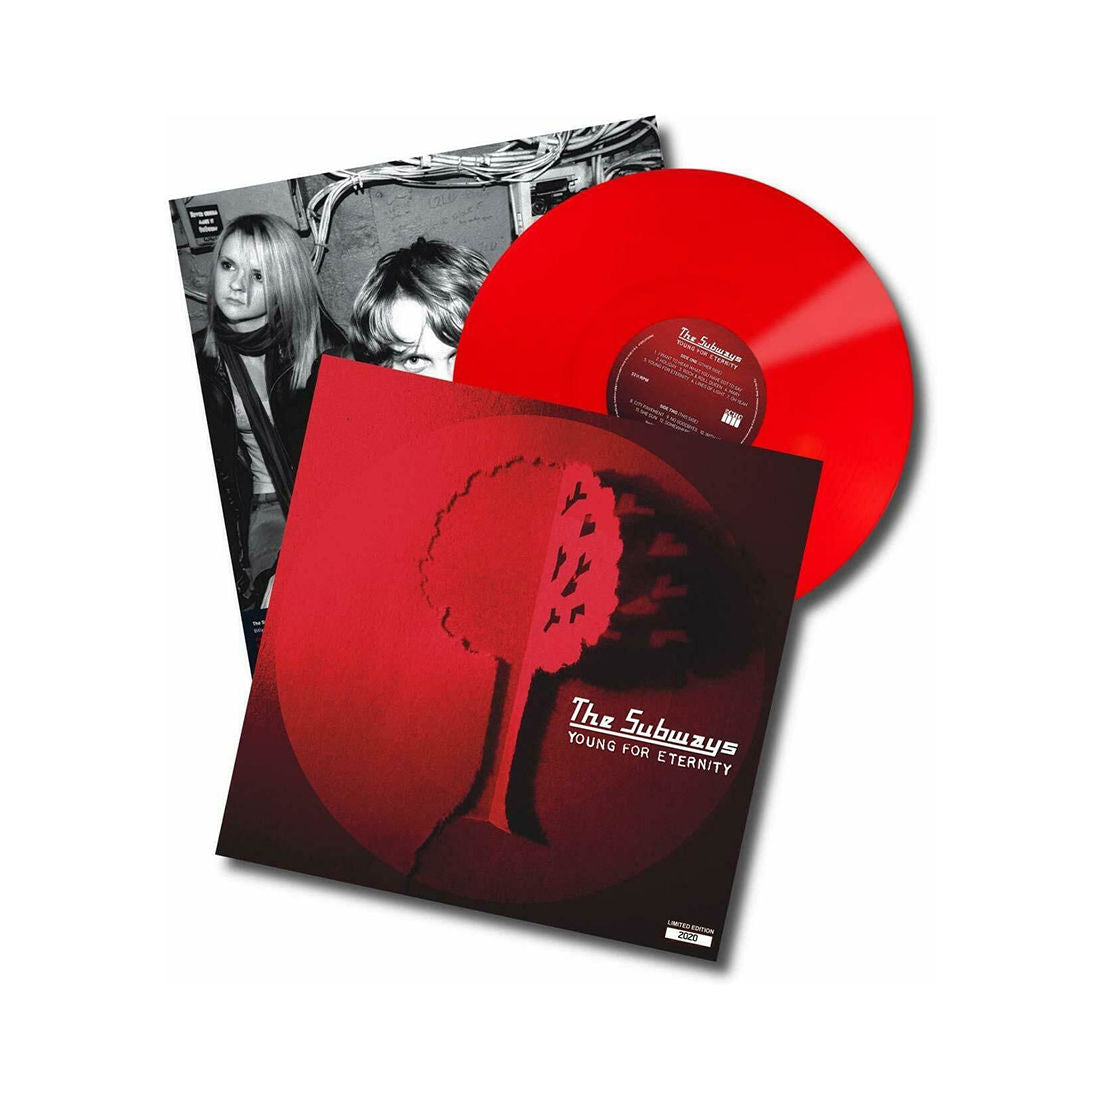 Young For Eternity: Limited Edition Red Vinyl LP